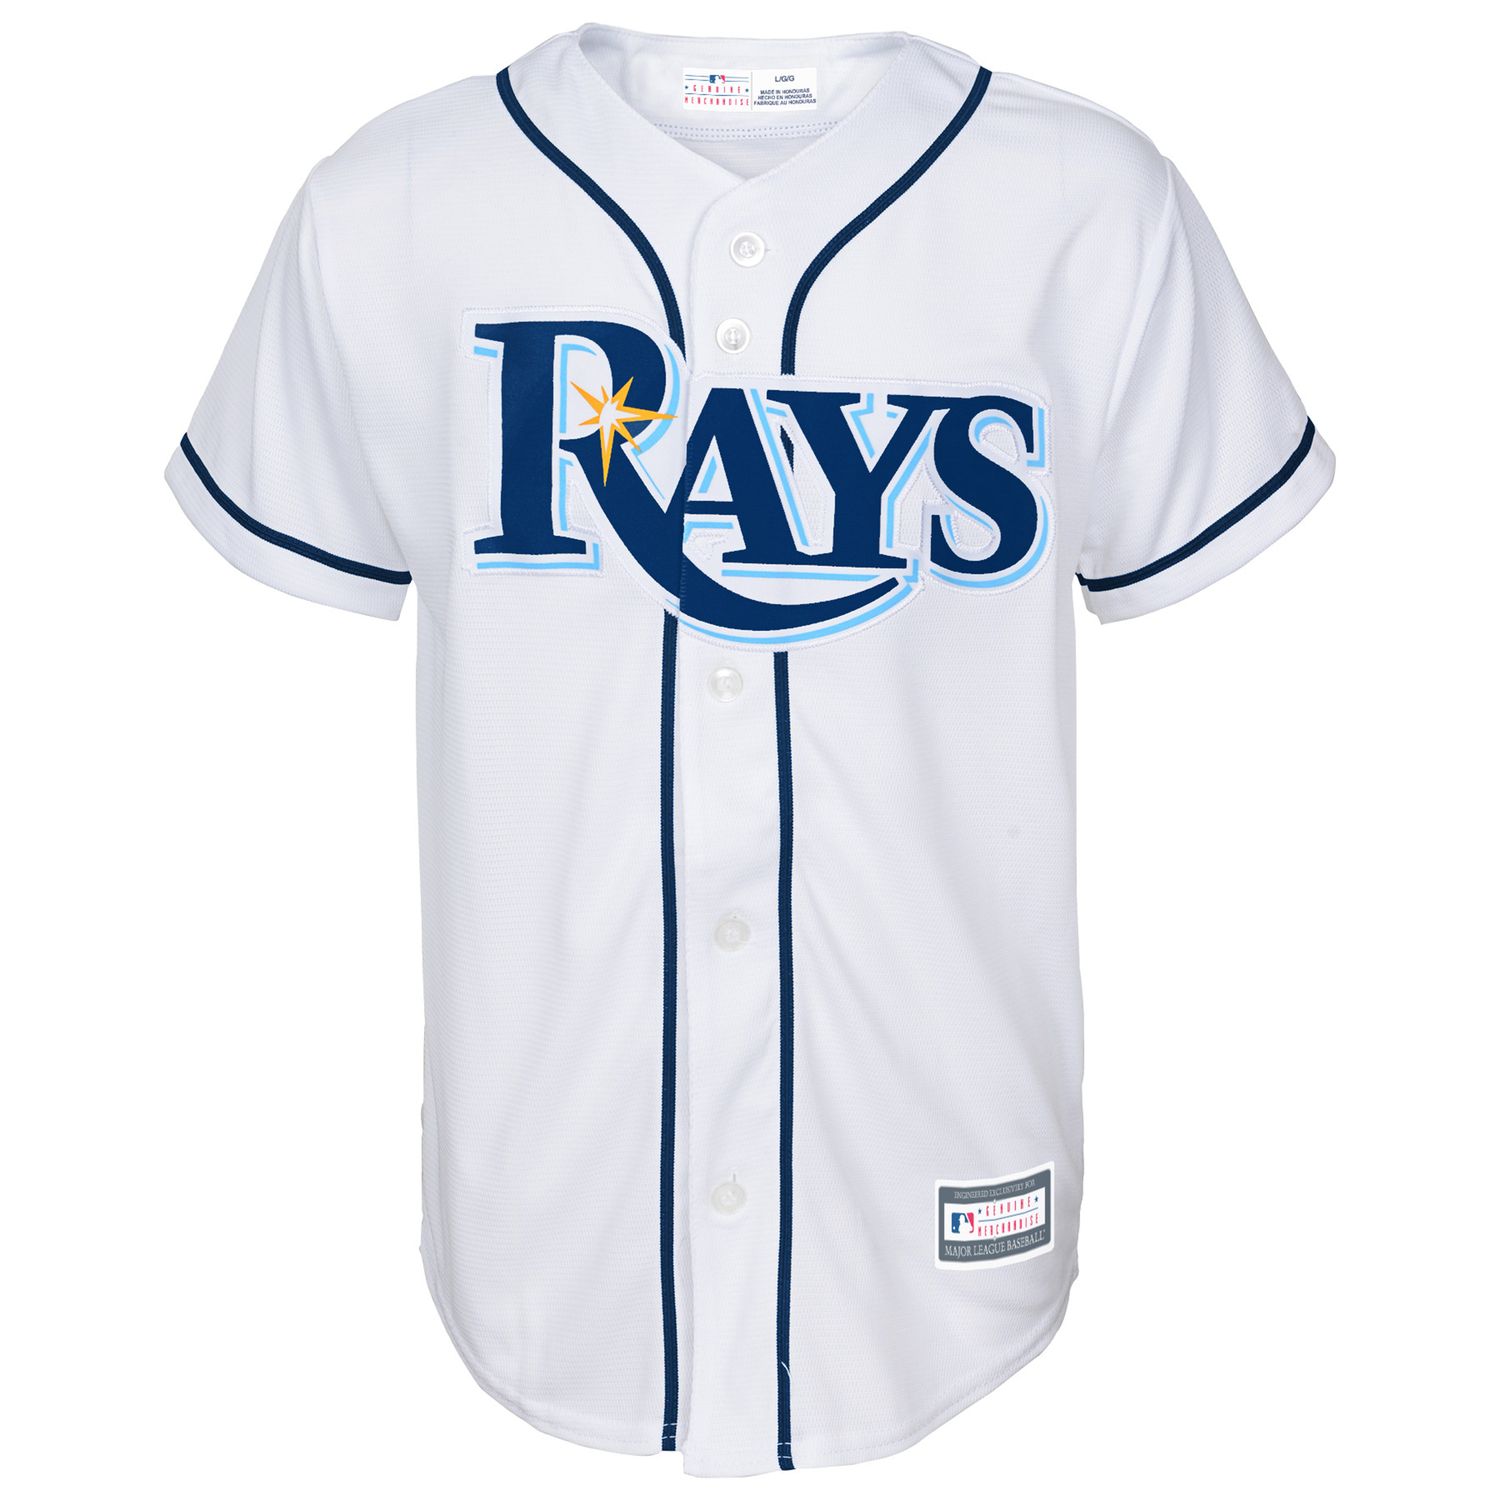 Tampa Bay Rays Home Replica Jersey